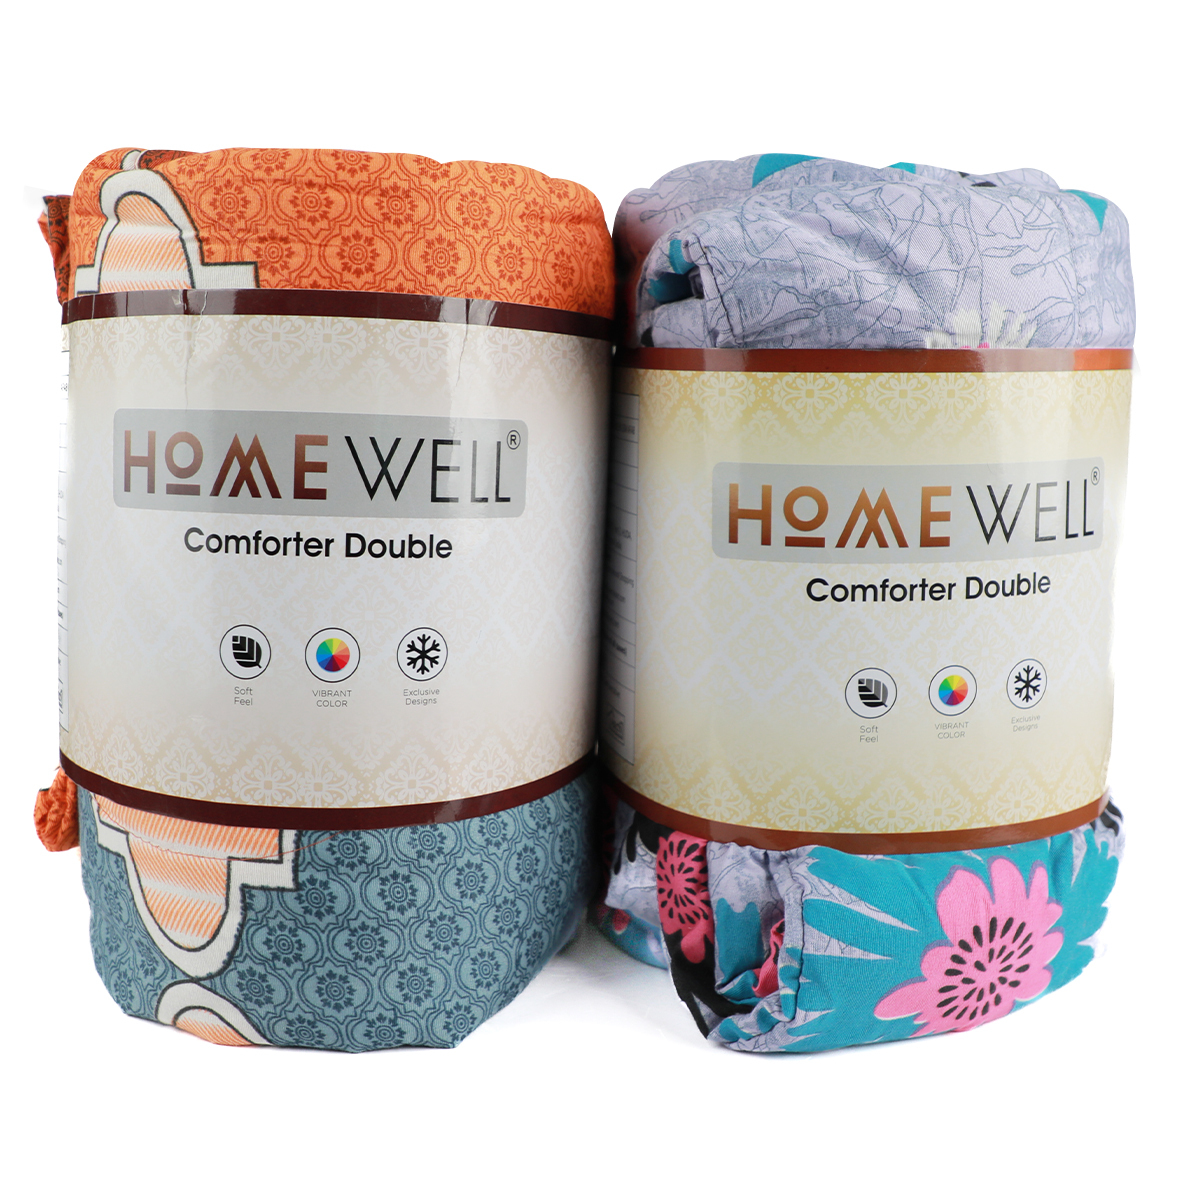 Home Well Comforter Double Assorted Colour and Assorted Design 90 Gsm